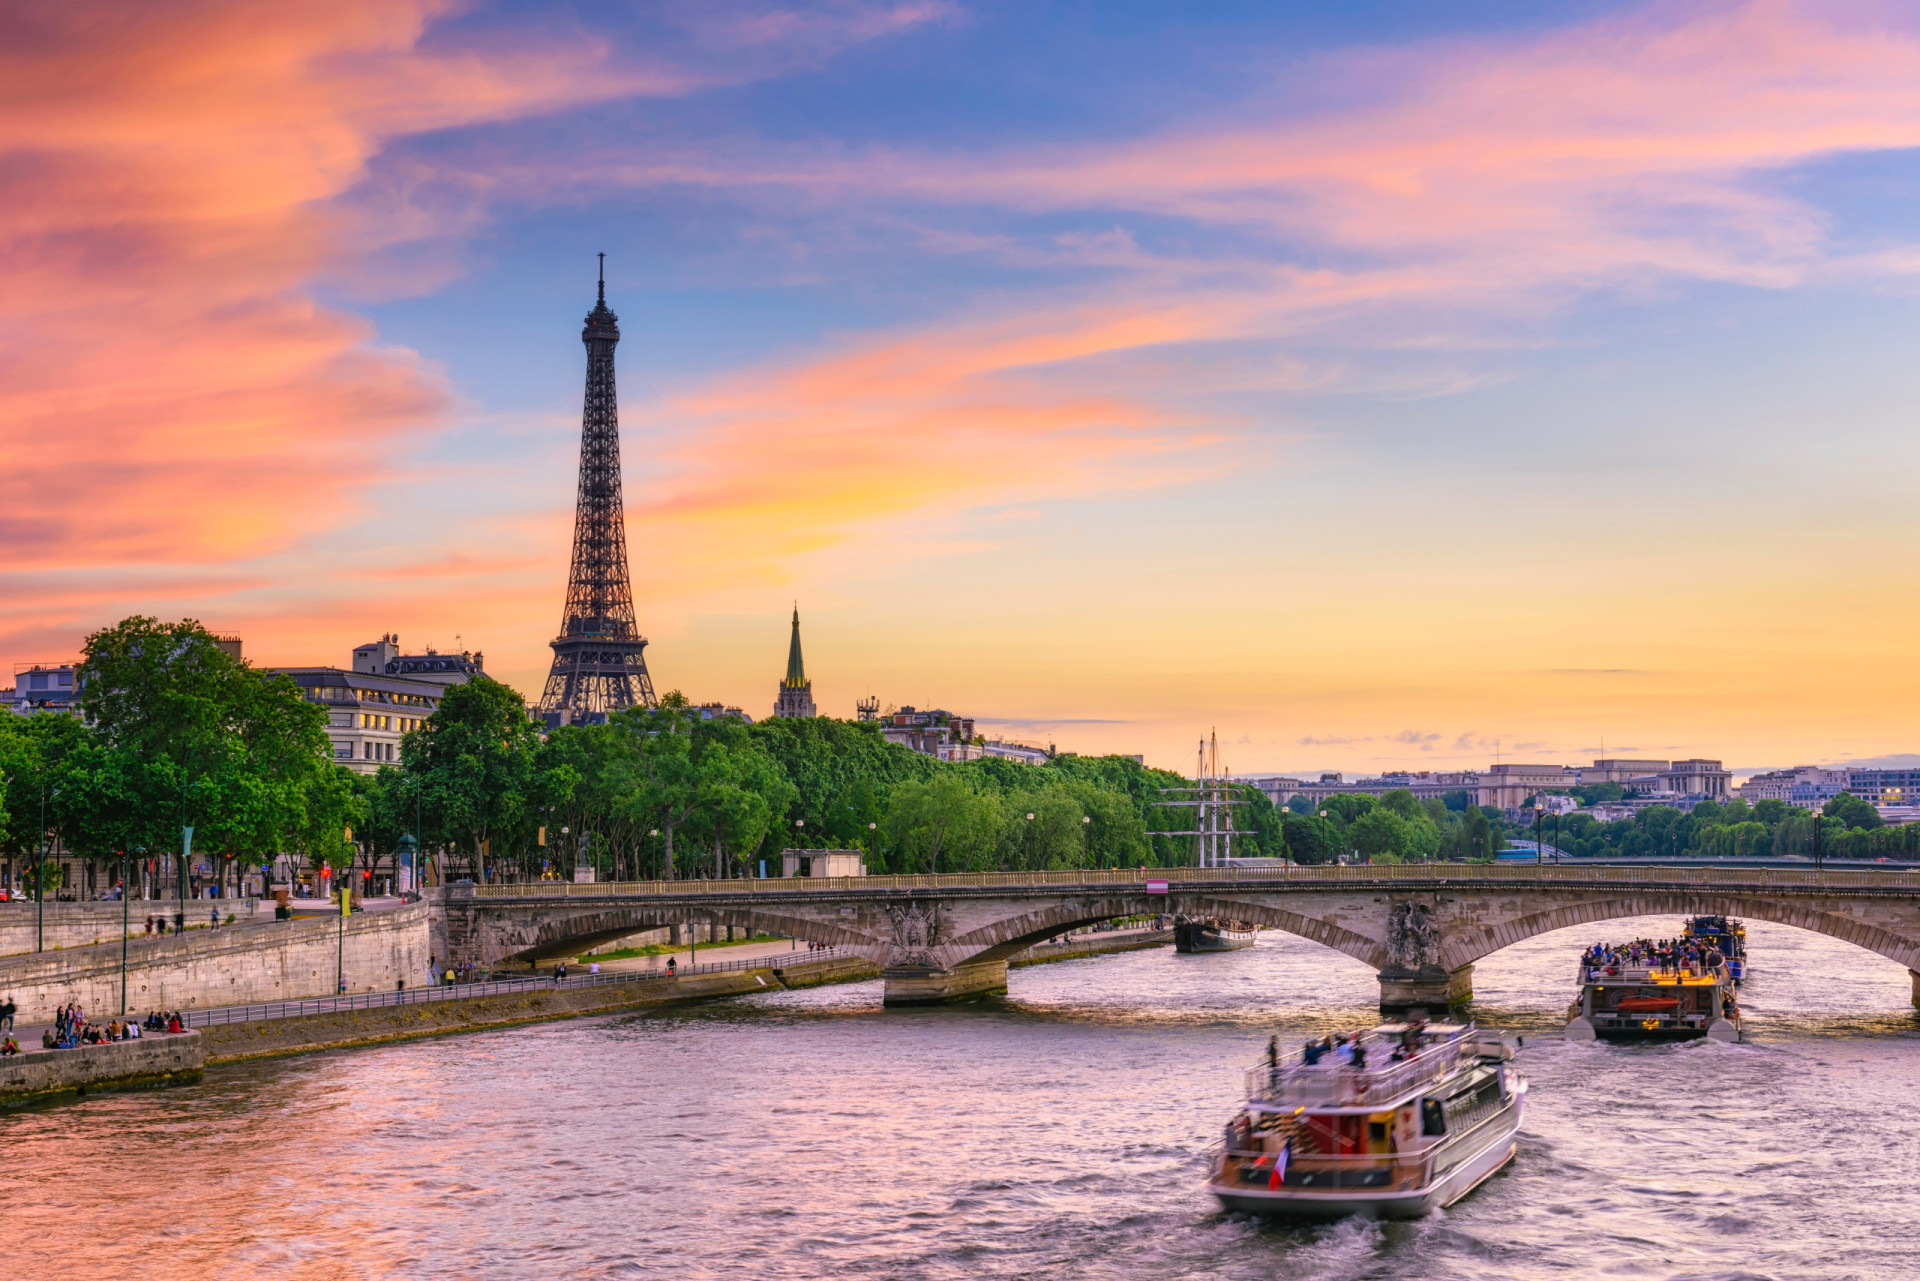 <p>France's <em>taxe de séjour</em> varies depending on city, and tends to be added to your hotel bill per night. The tax is used to maintain tourism infrastructure in popular destinations, such as Paris and Nice.</p><p><a href="https://www.msn.com/en-ph/community/channel/vid-7xx8mnucu55yw63we9va2gwr7uihbxwc68fxqp25x6tg4ftibpra?cvid=94631541bc0f4f89bfd59158d696ad7e">Follow us and access great exclusive content every day</a></p>